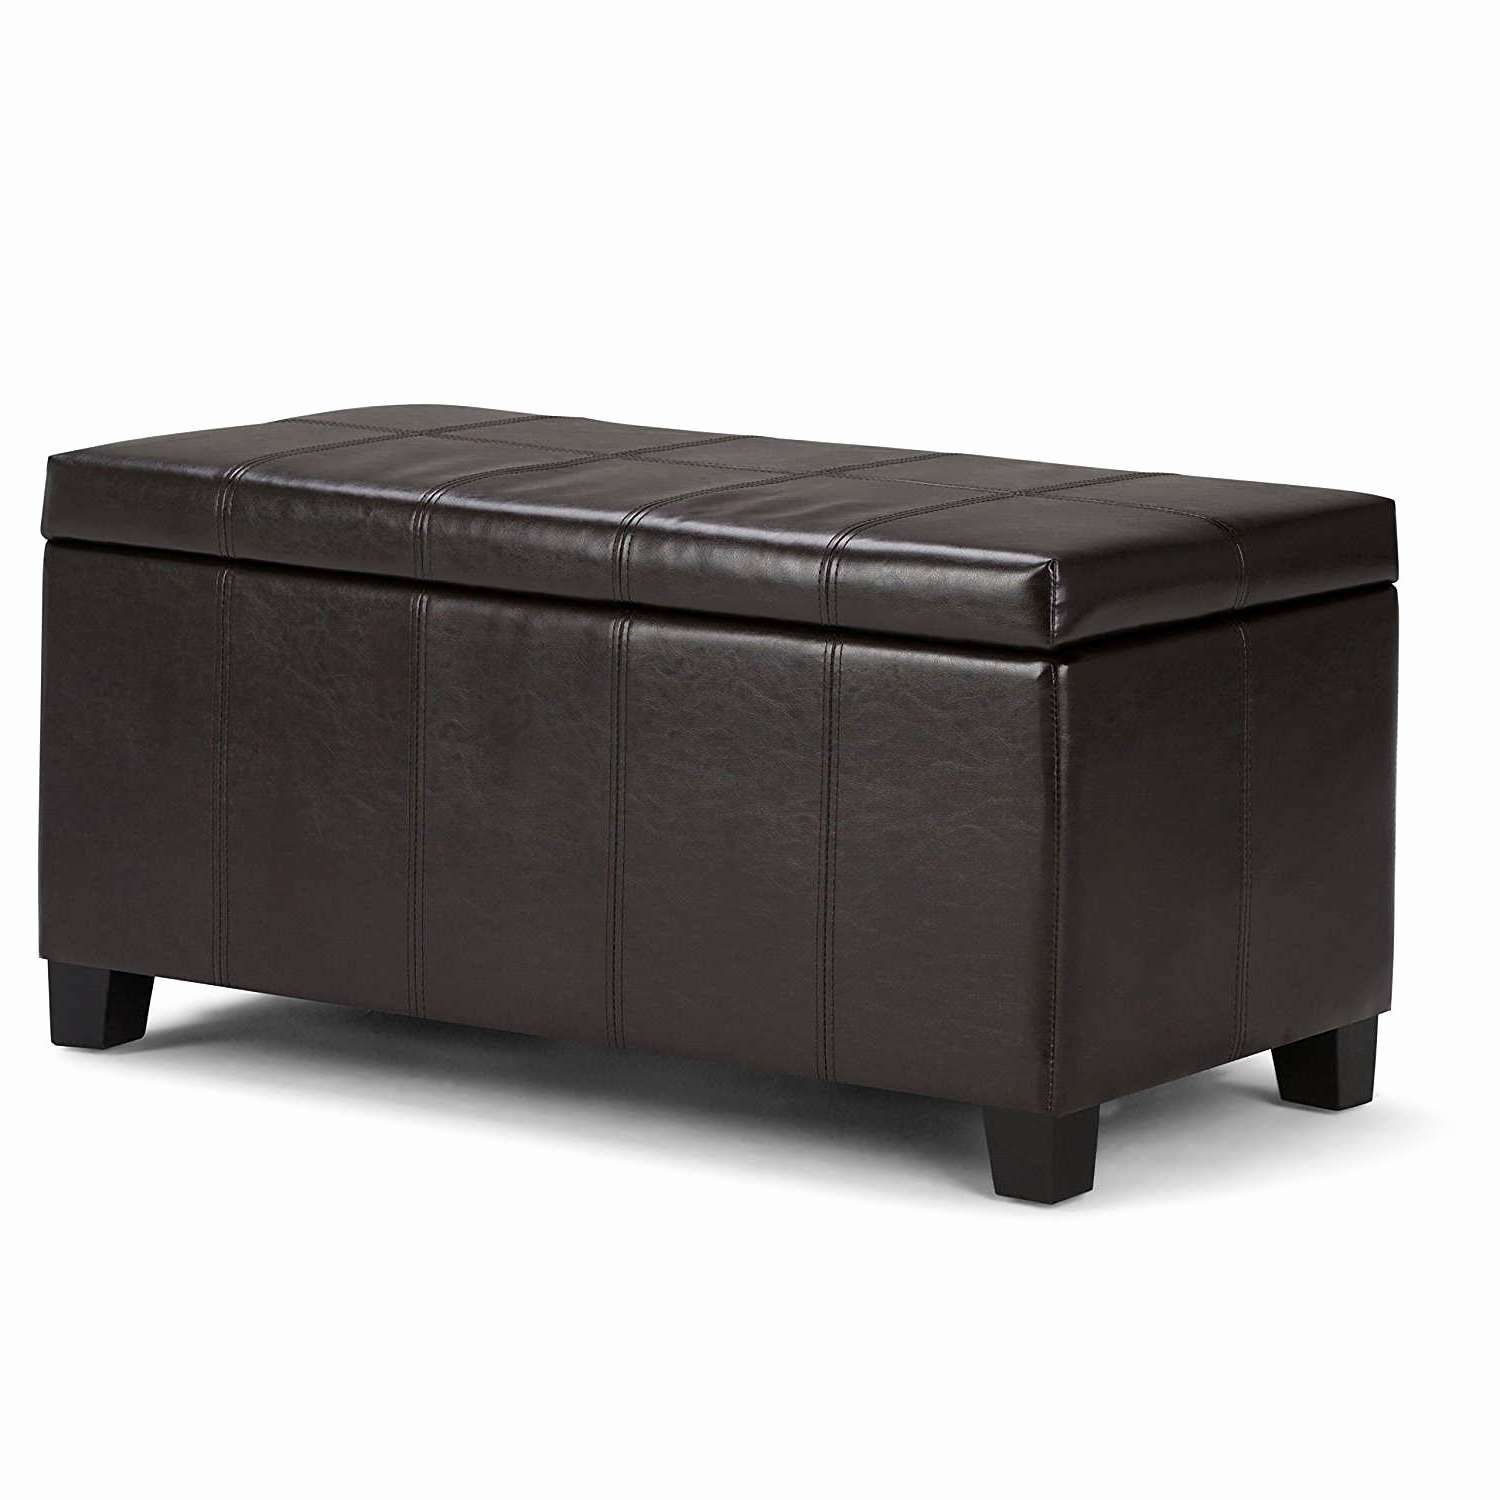 Best And Newest Purple Ottoman Coffee Tables In Purple Coffee Table Best Of Sofa Ottoman Coffee Table Purple (View 8 of 20)